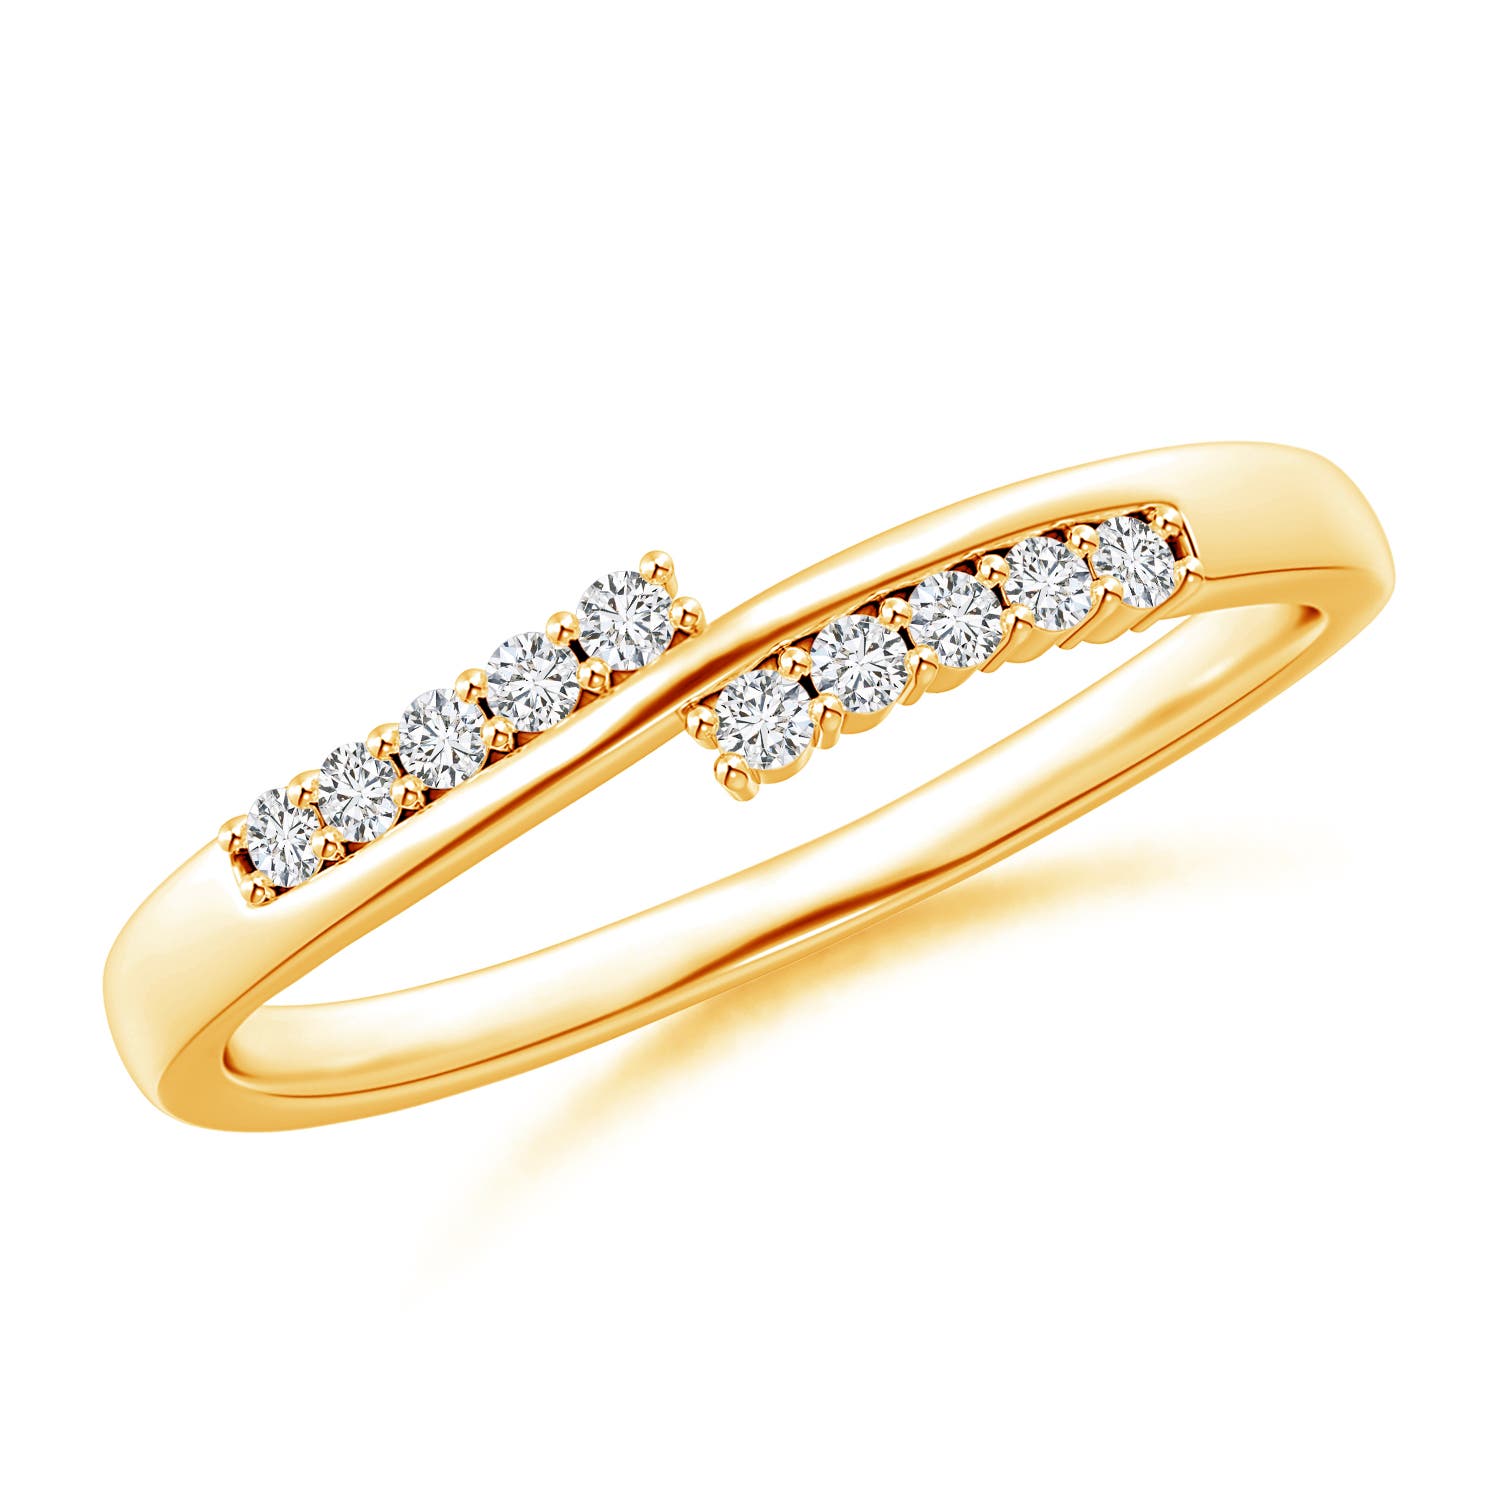 H, SI2 / 0.12 CT / 14 KT Yellow Gold